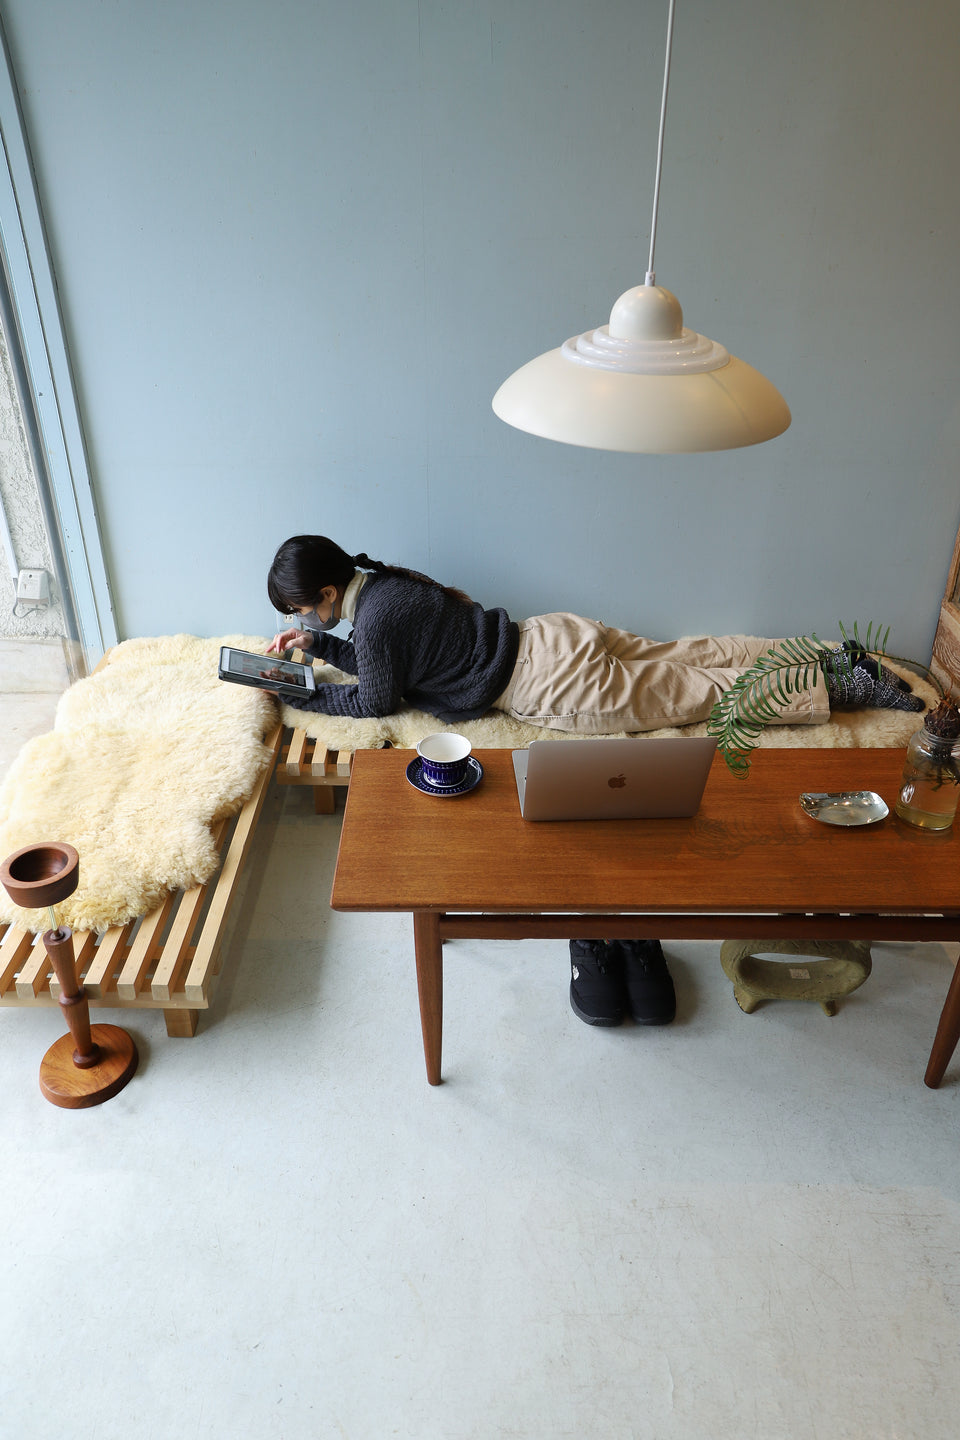 Charlotte Perriand Style Wooden Slit Low Bench/スリット ローベンチ 木製 シャルロット・ペリアン スタイル